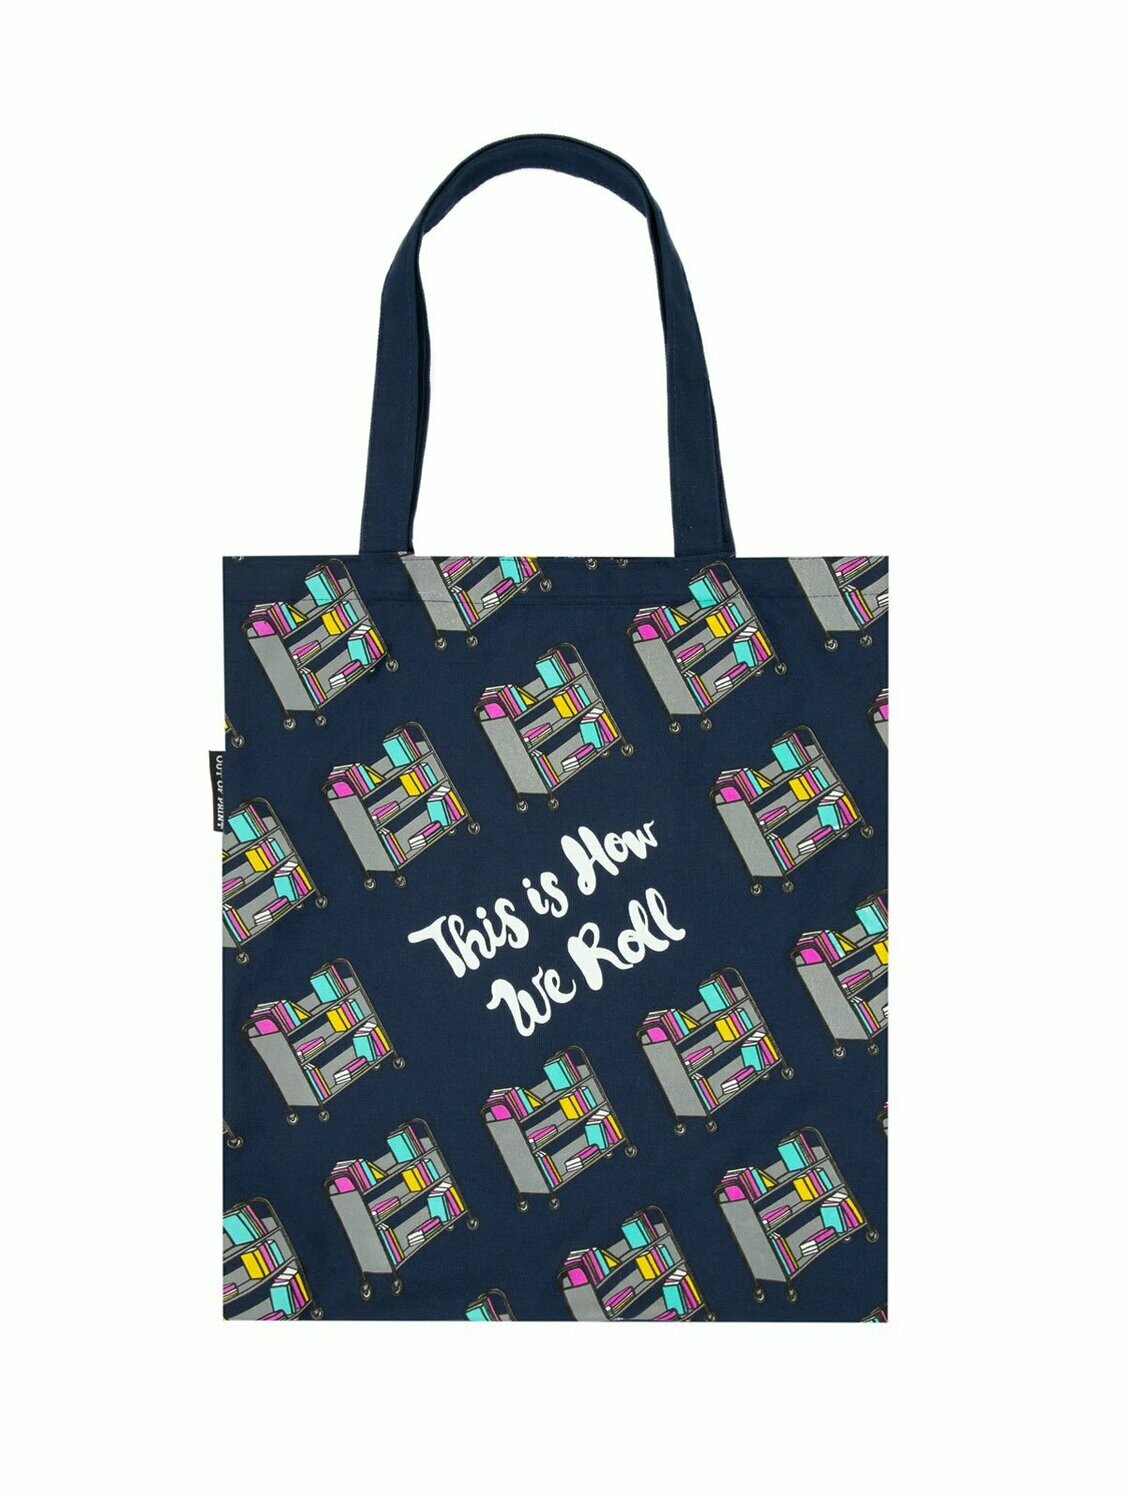 This Is How We Roll tote bag